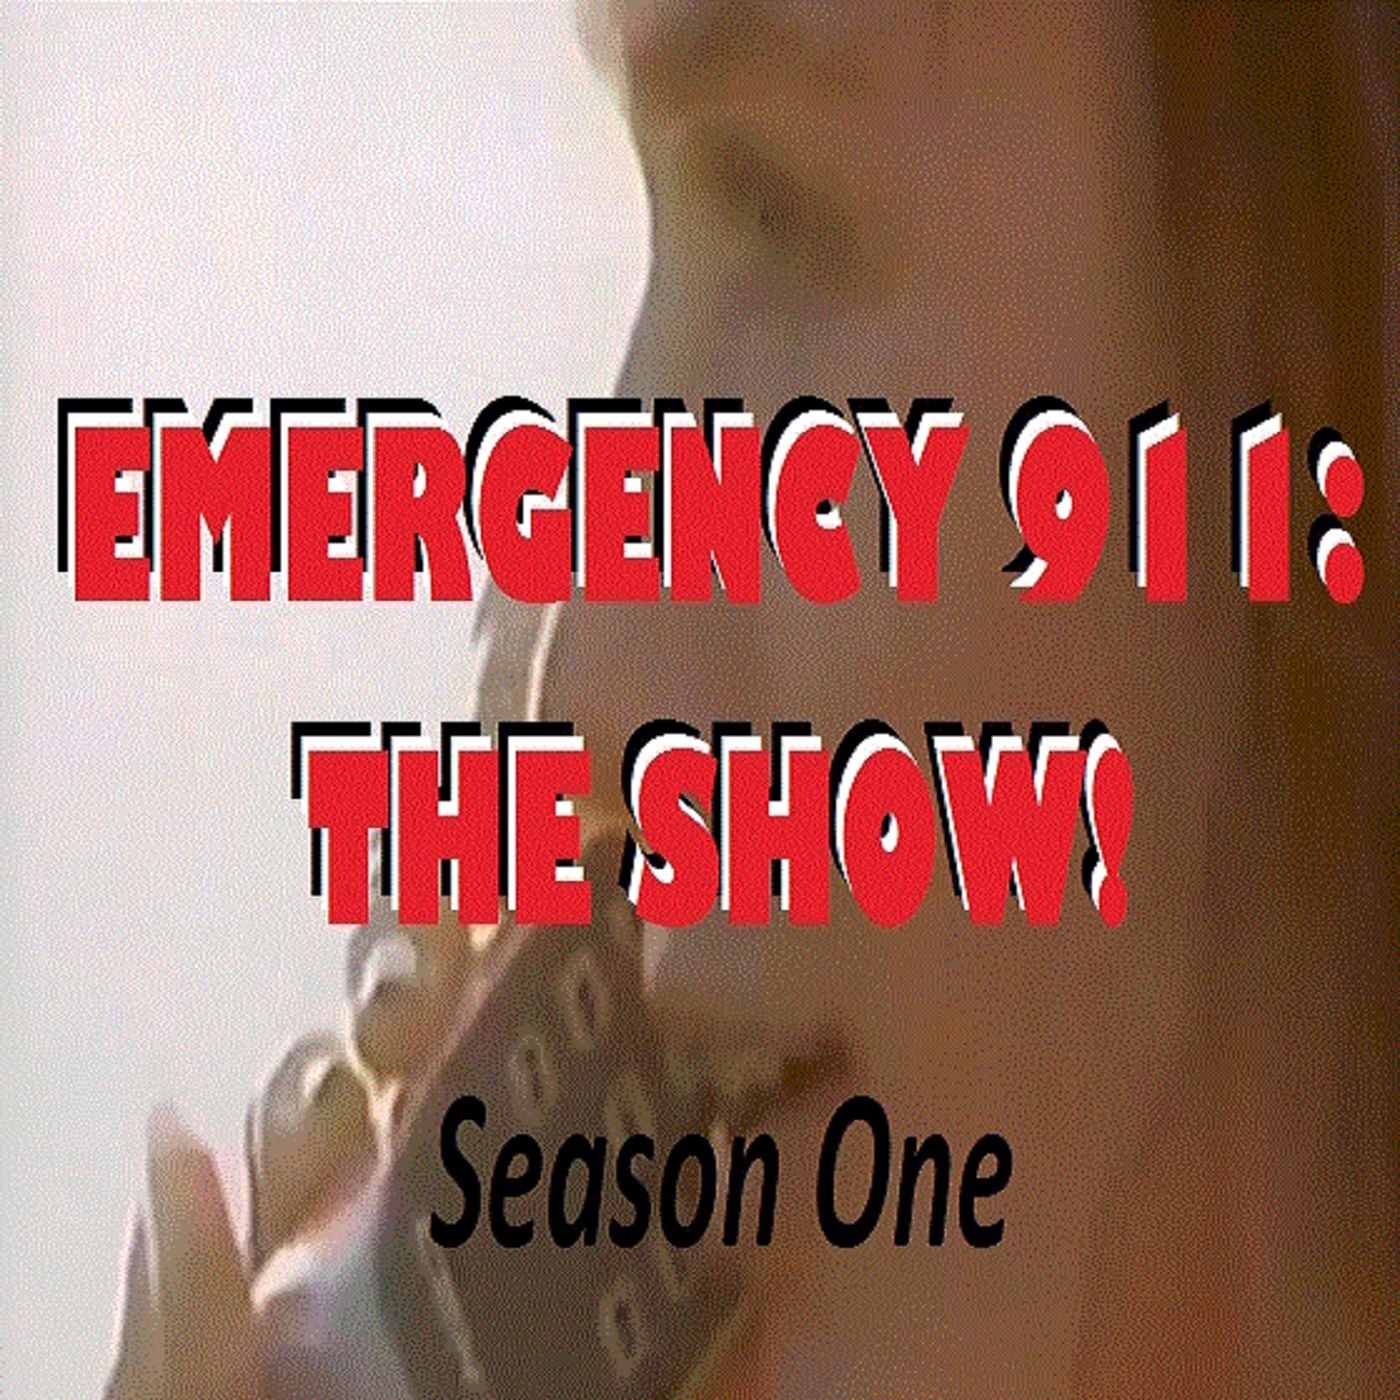 EMERGENCY 911: The Show!